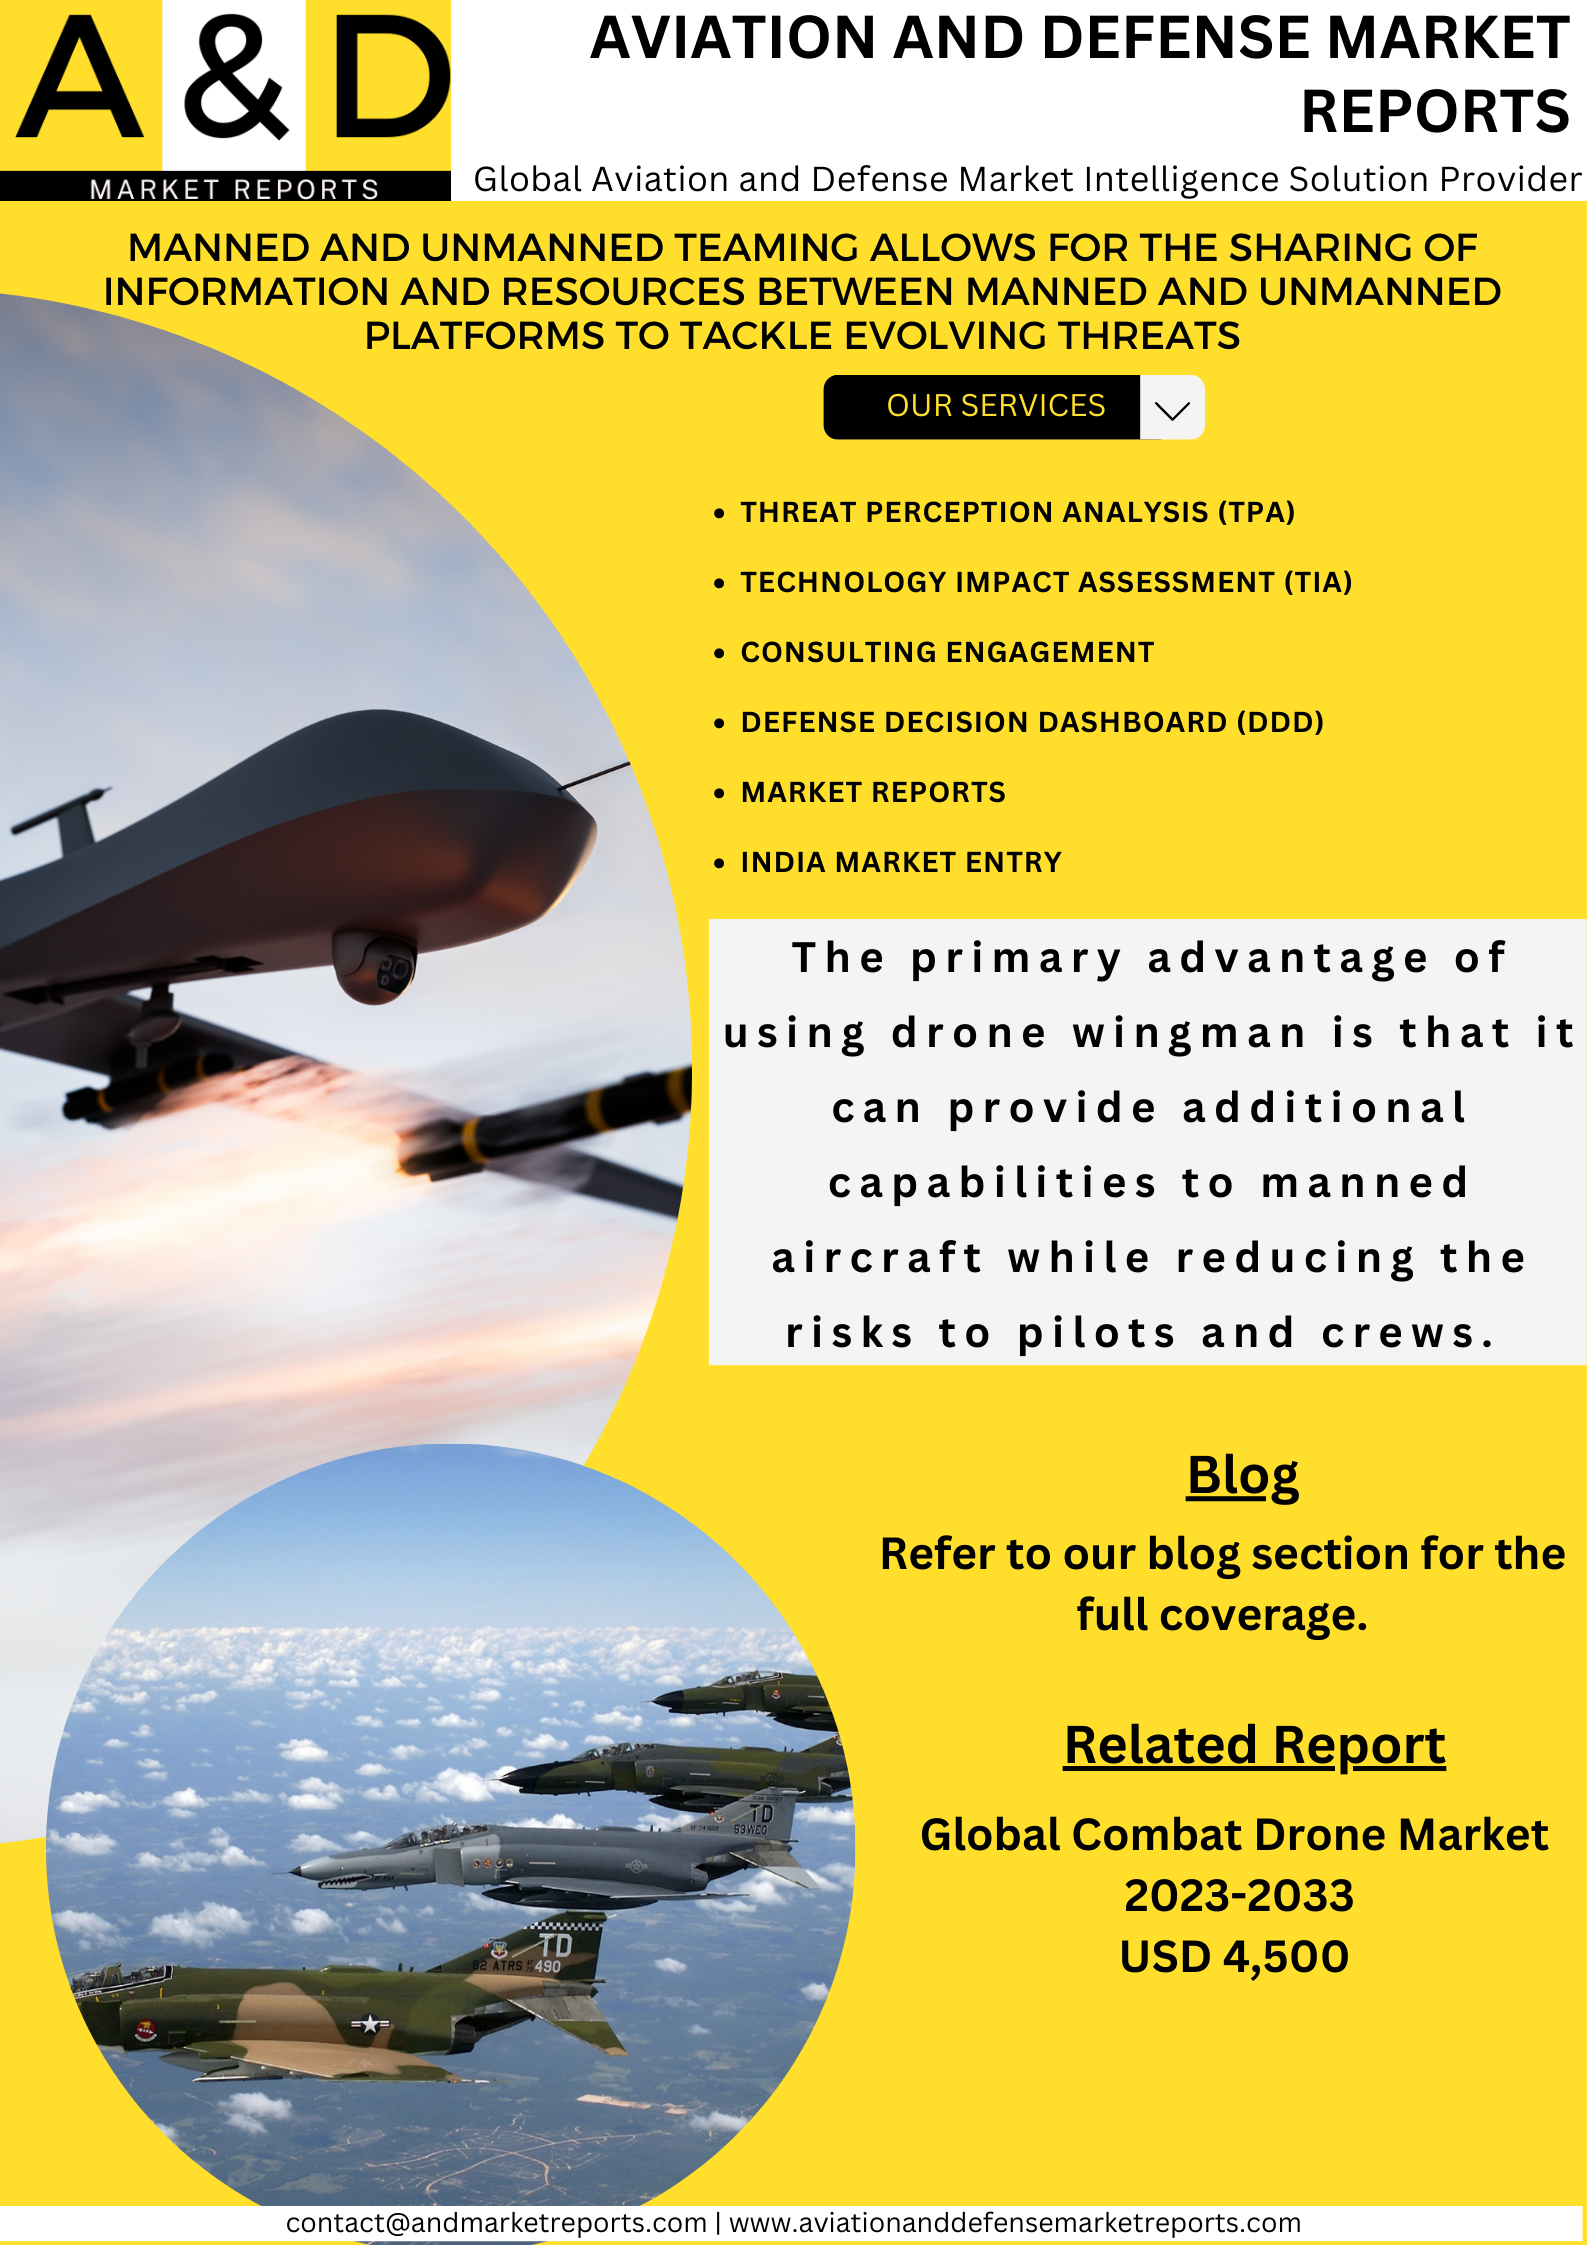 Manned – Unmanned Team Allows The Sharing of Information And Resources To Tackle Evolving Threats